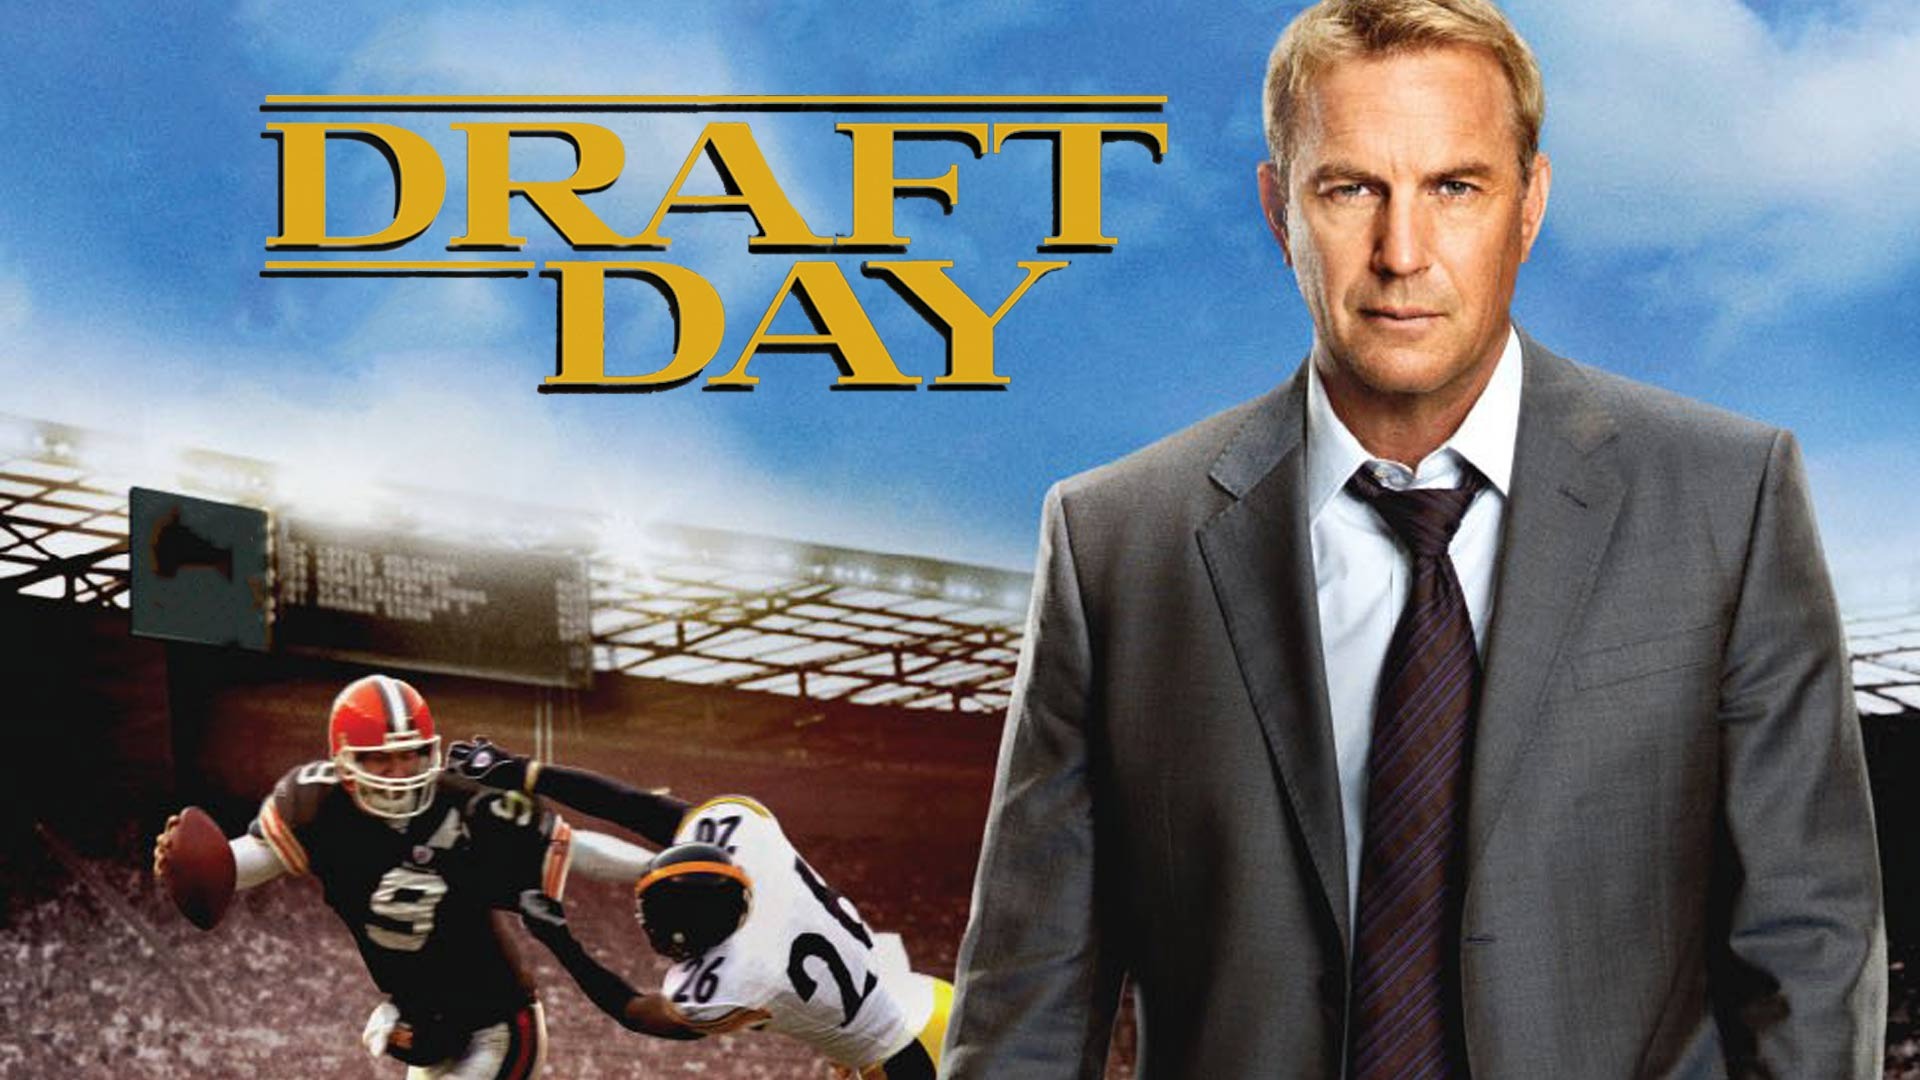 How To Watch Draft Day